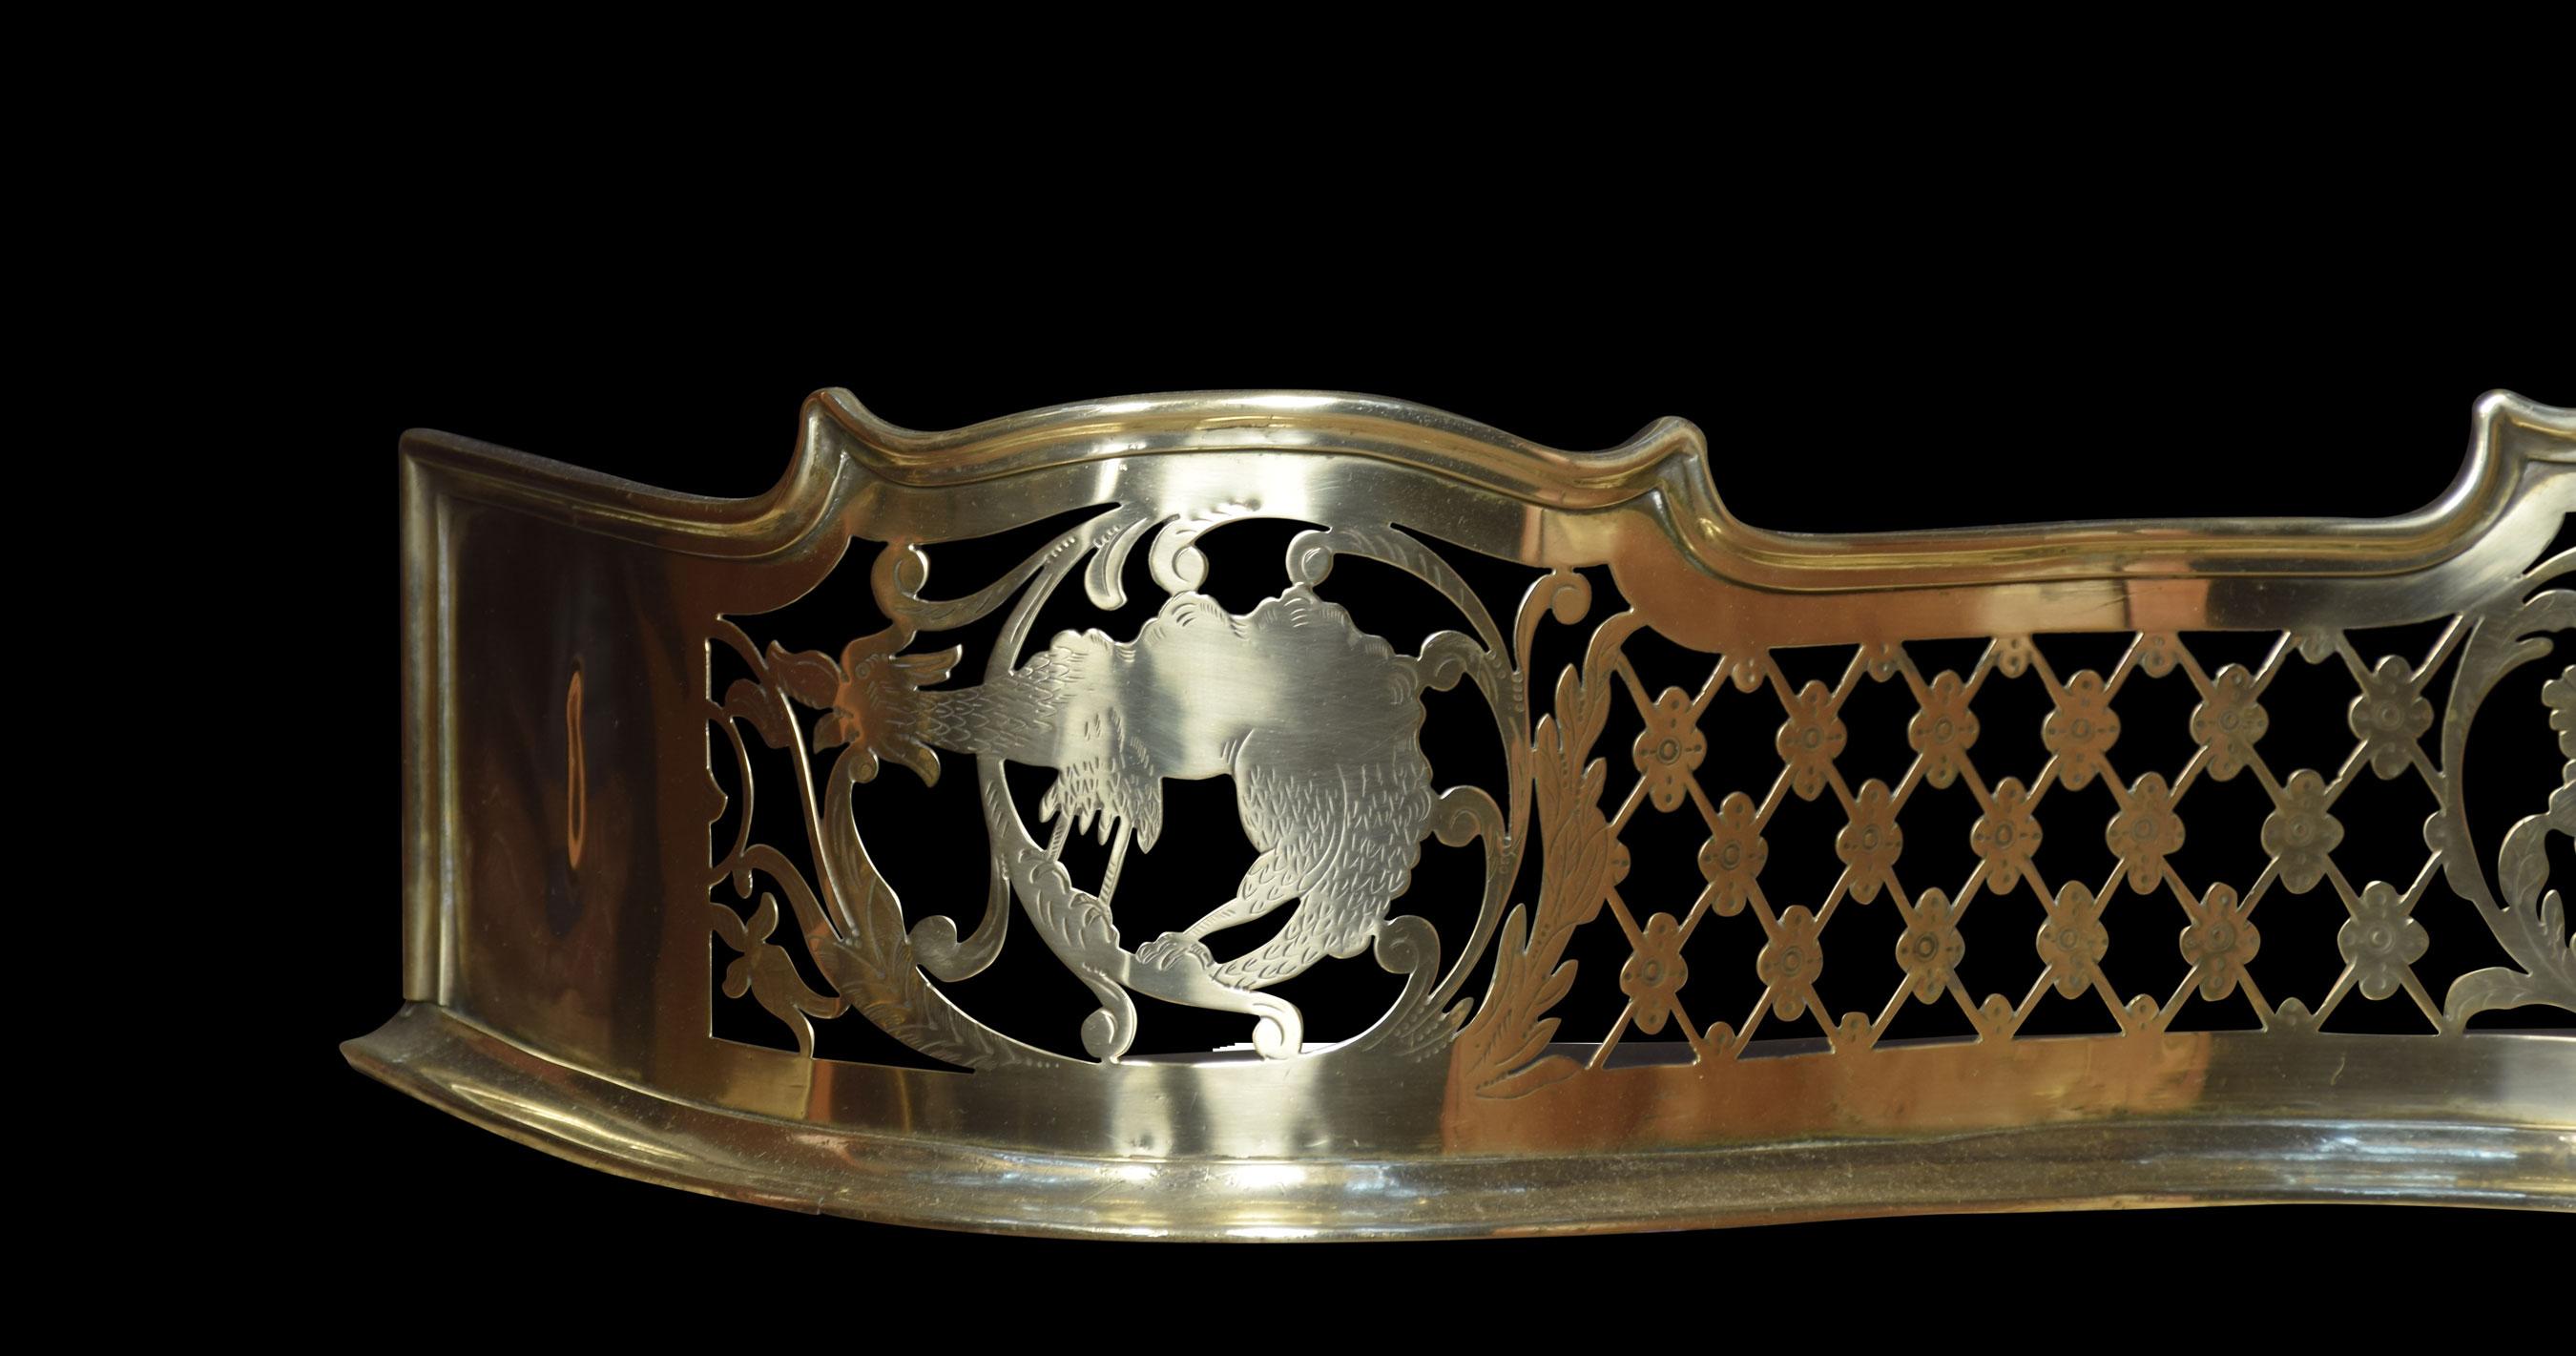 Regency pierced brass serpentine fronted fender, with central urn motif flanked by griffins and phoenix.
Dimensions
Height 8.5 inches
Width 53 inches
Depth 14 inches.